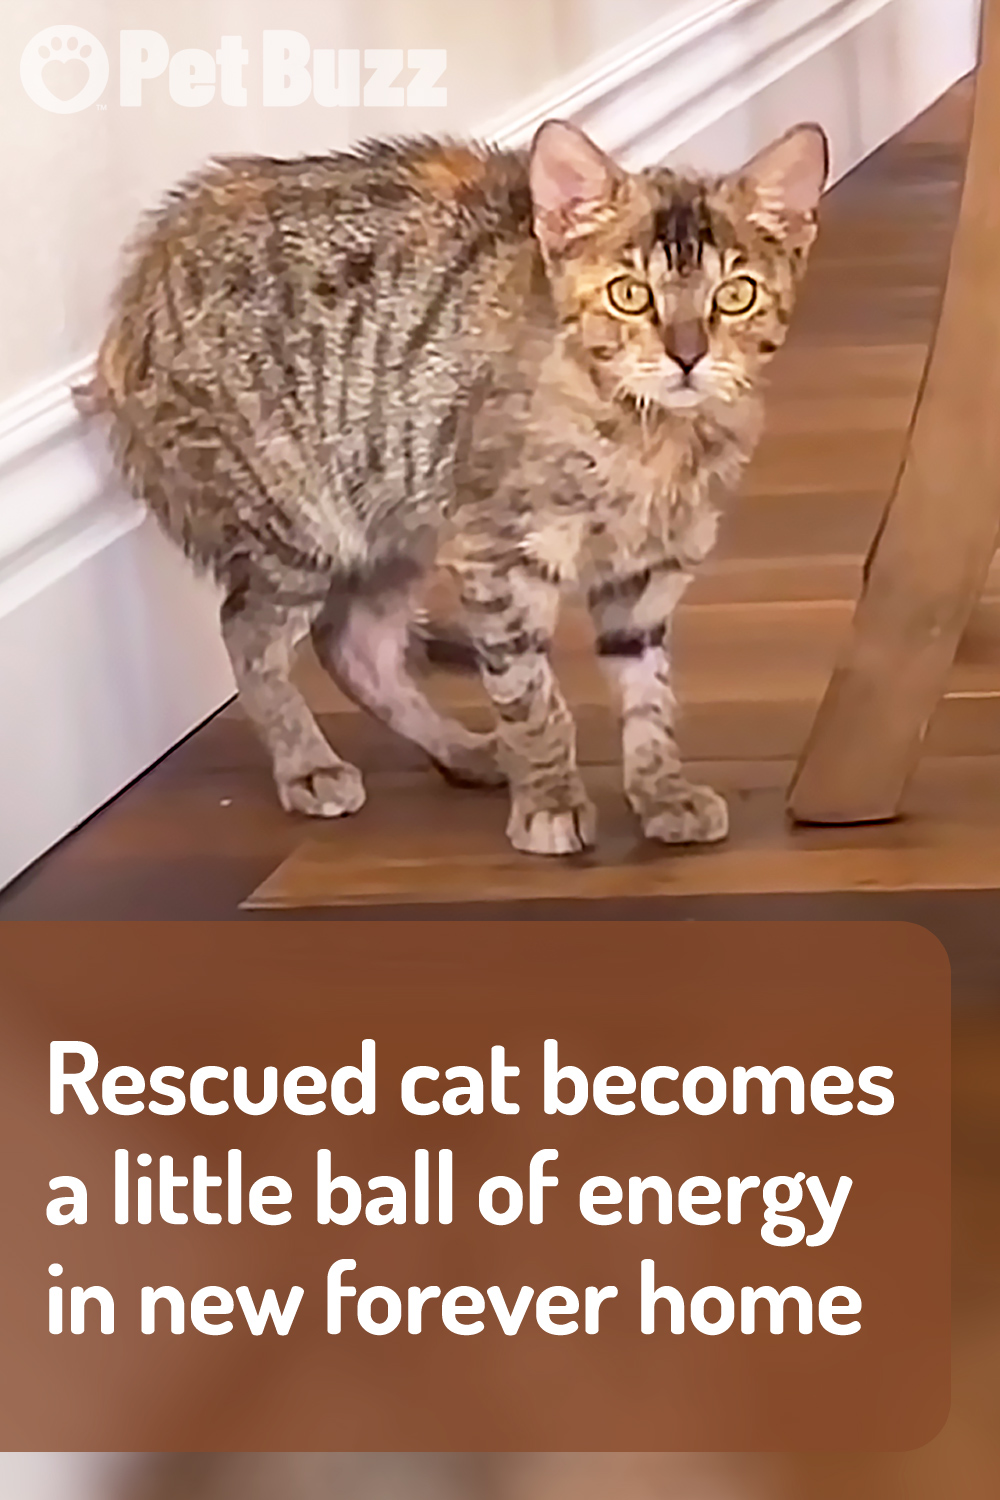 Rescued cat becomes a little ball of energy in new forever home